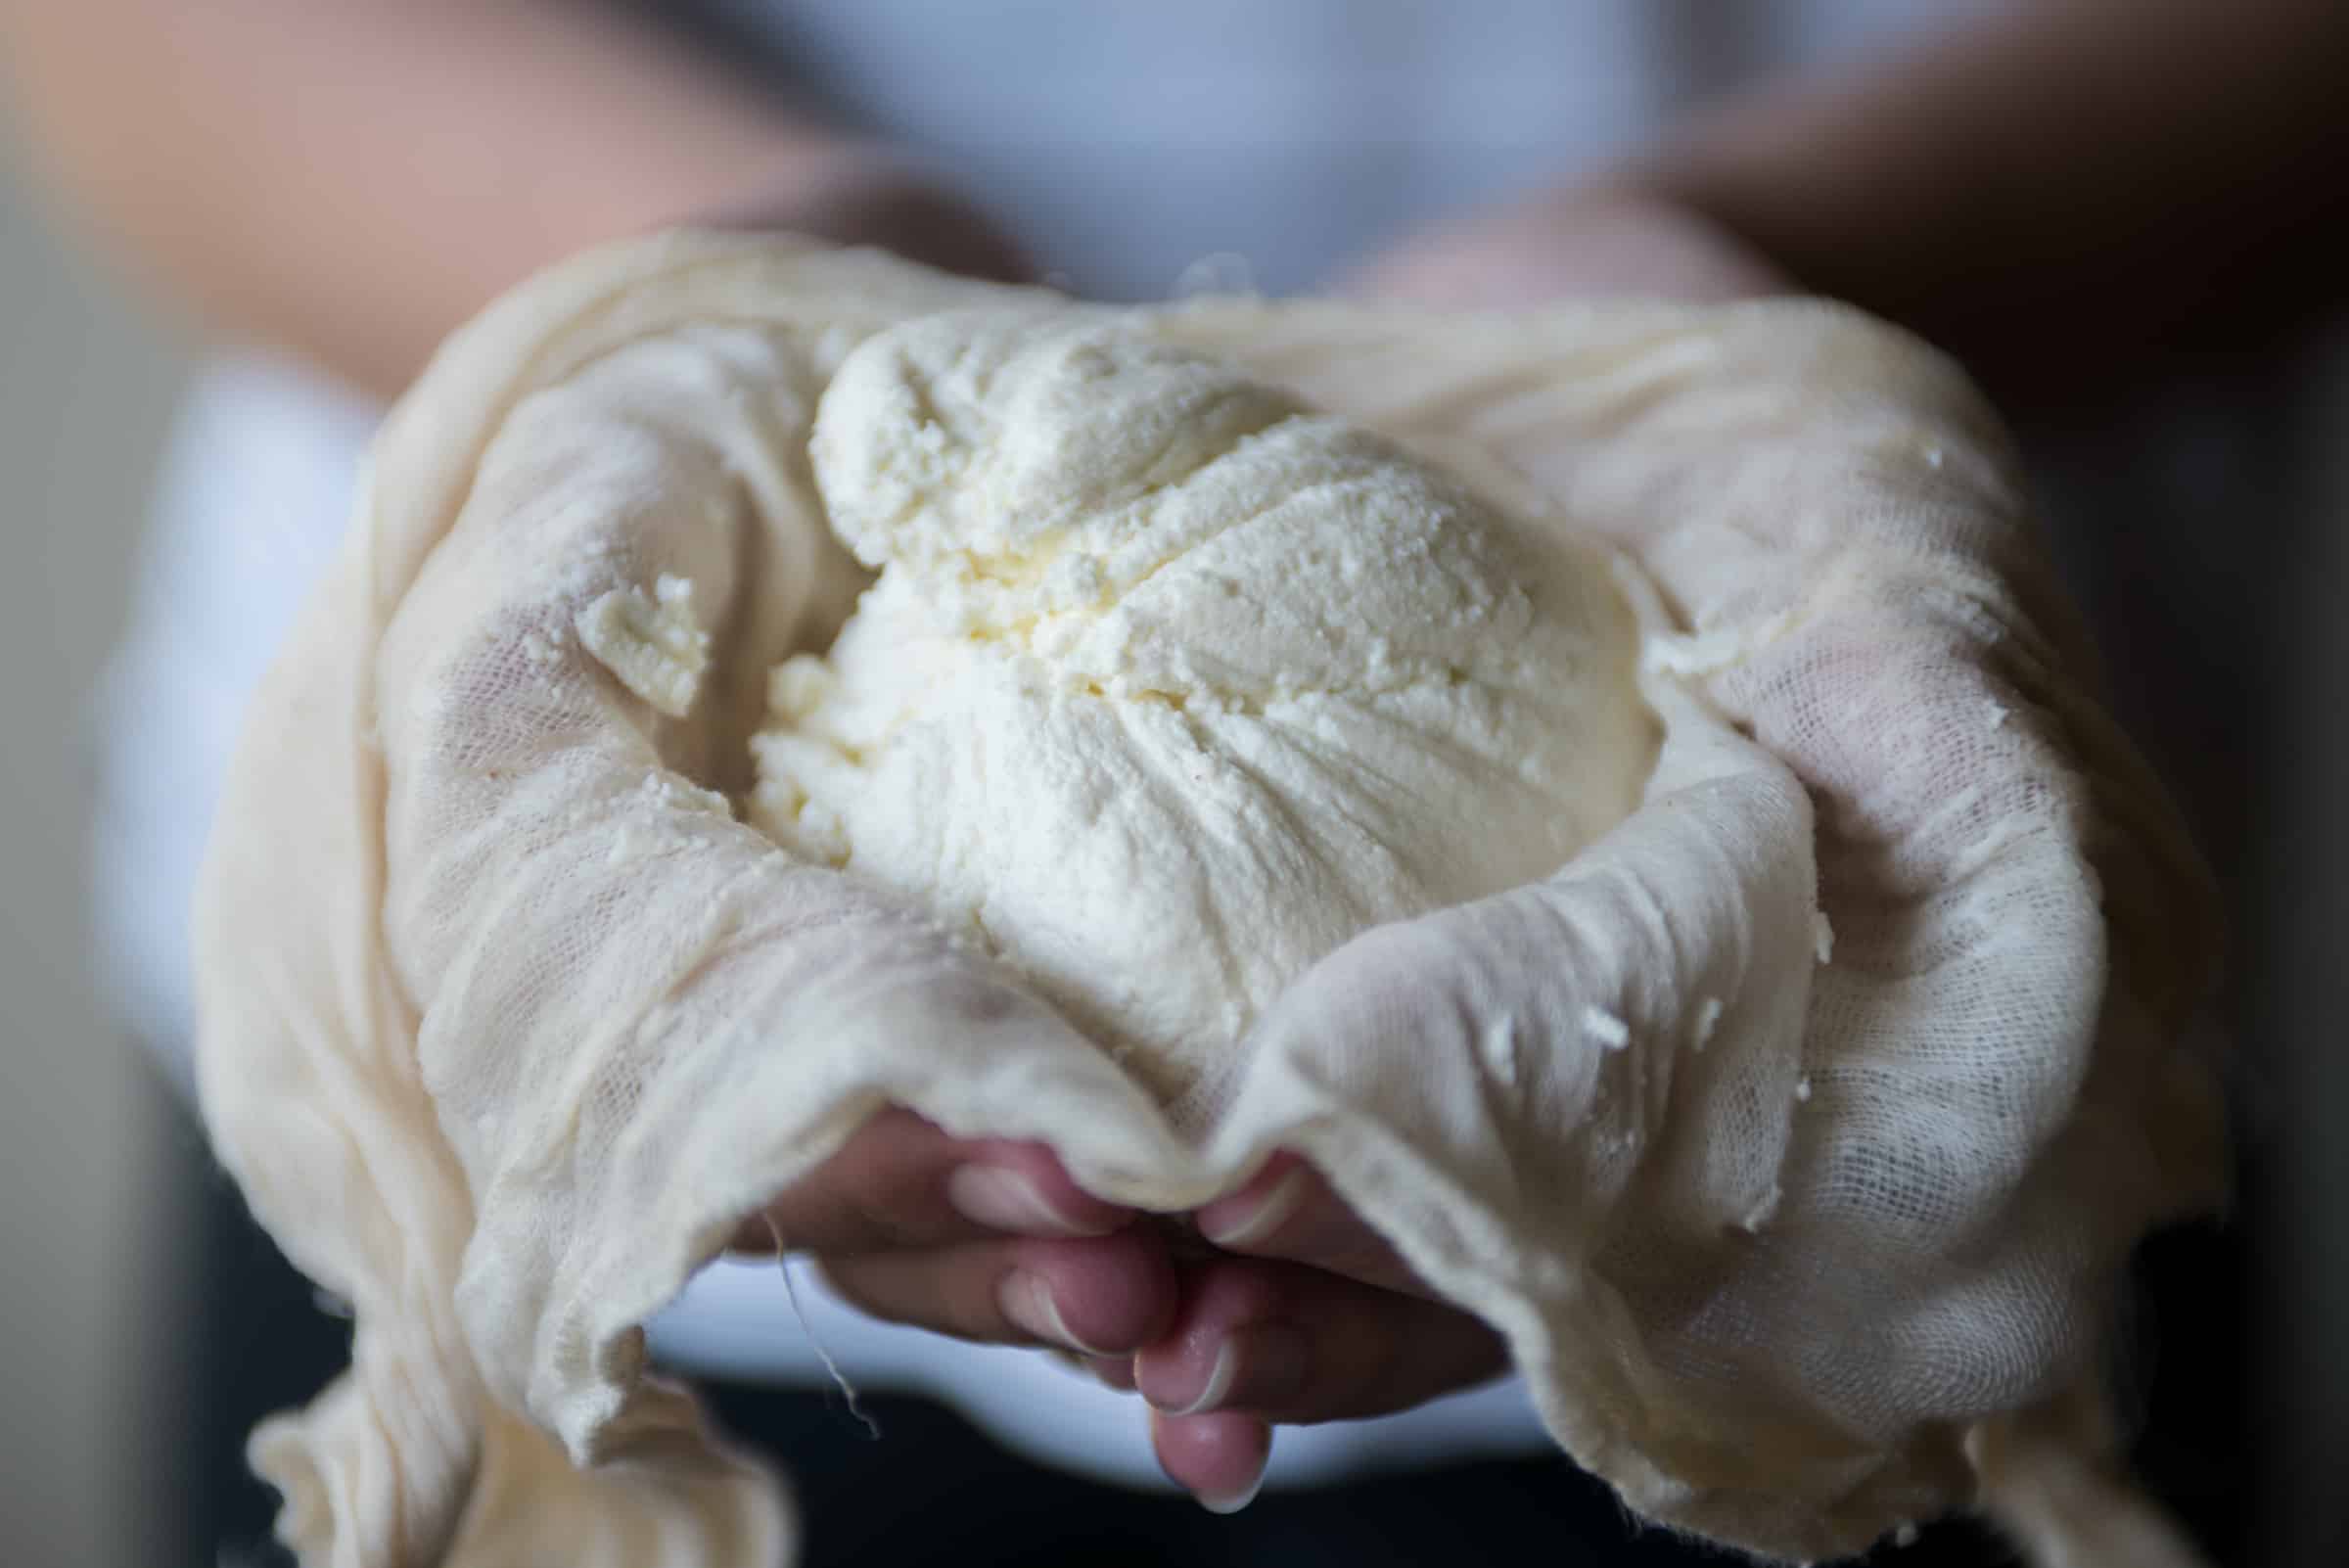 Closeup of woman holding drained ricotta cheese